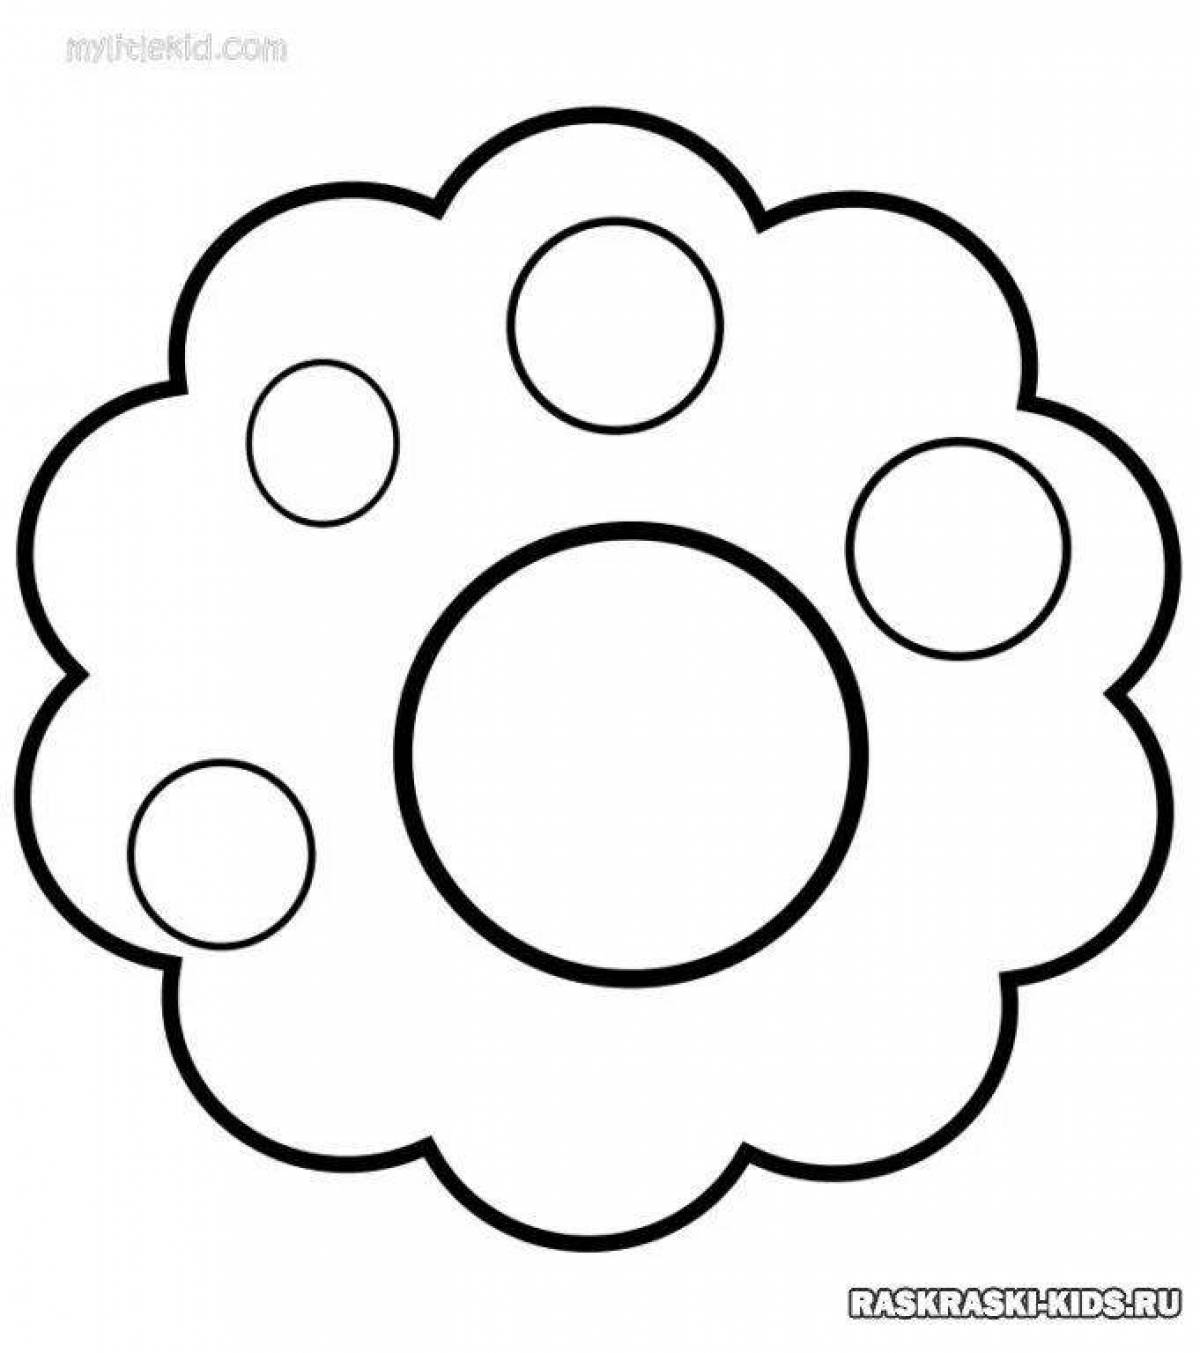 Playful navel coloring page